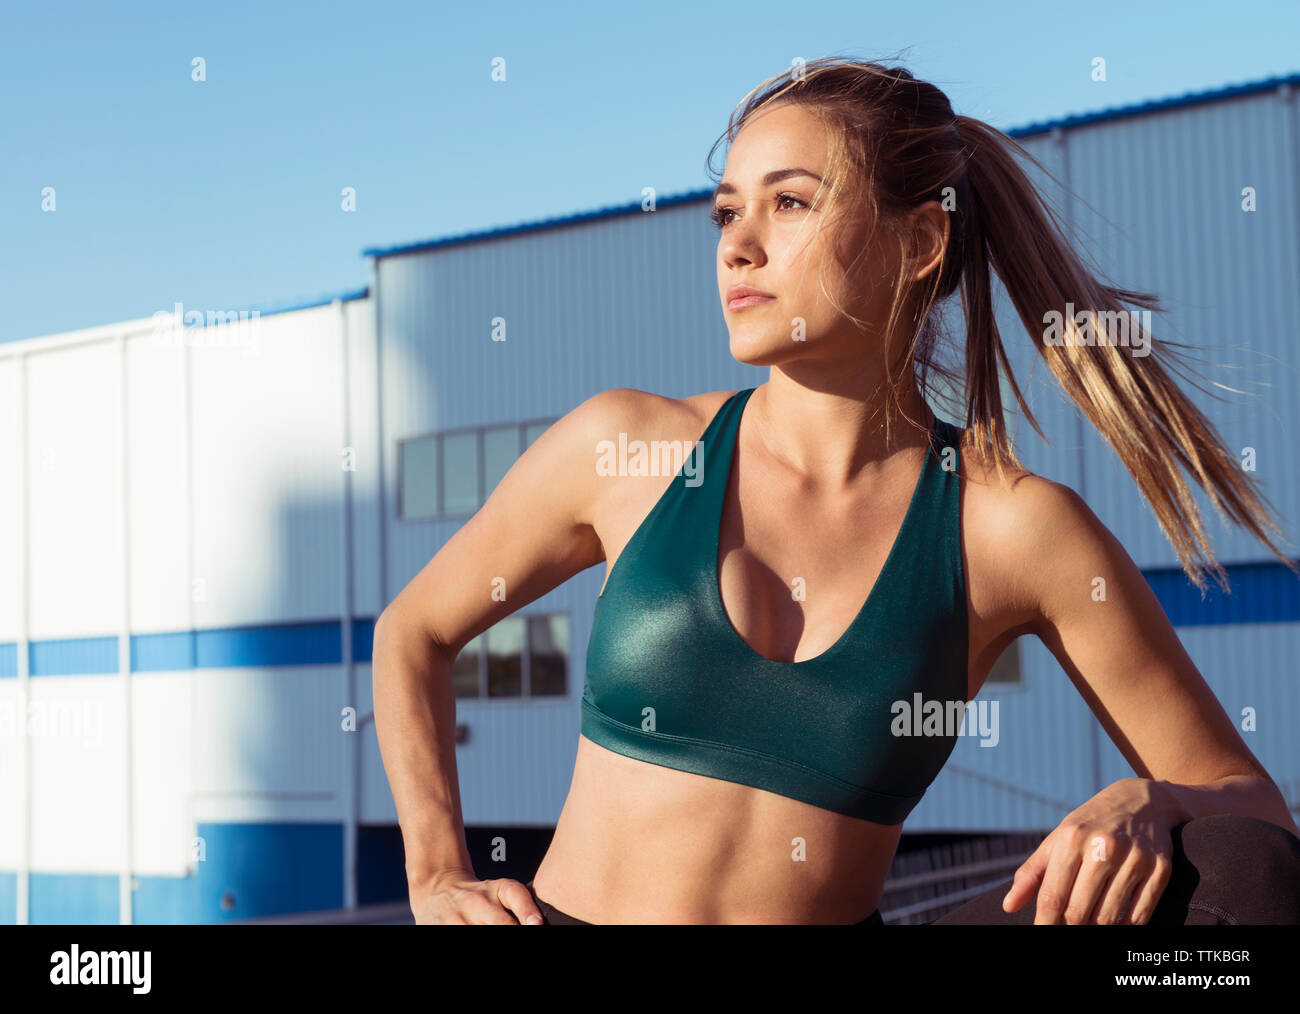 Thoughtful young woman wearing sports bra while standing against buildings in city Stock Photo